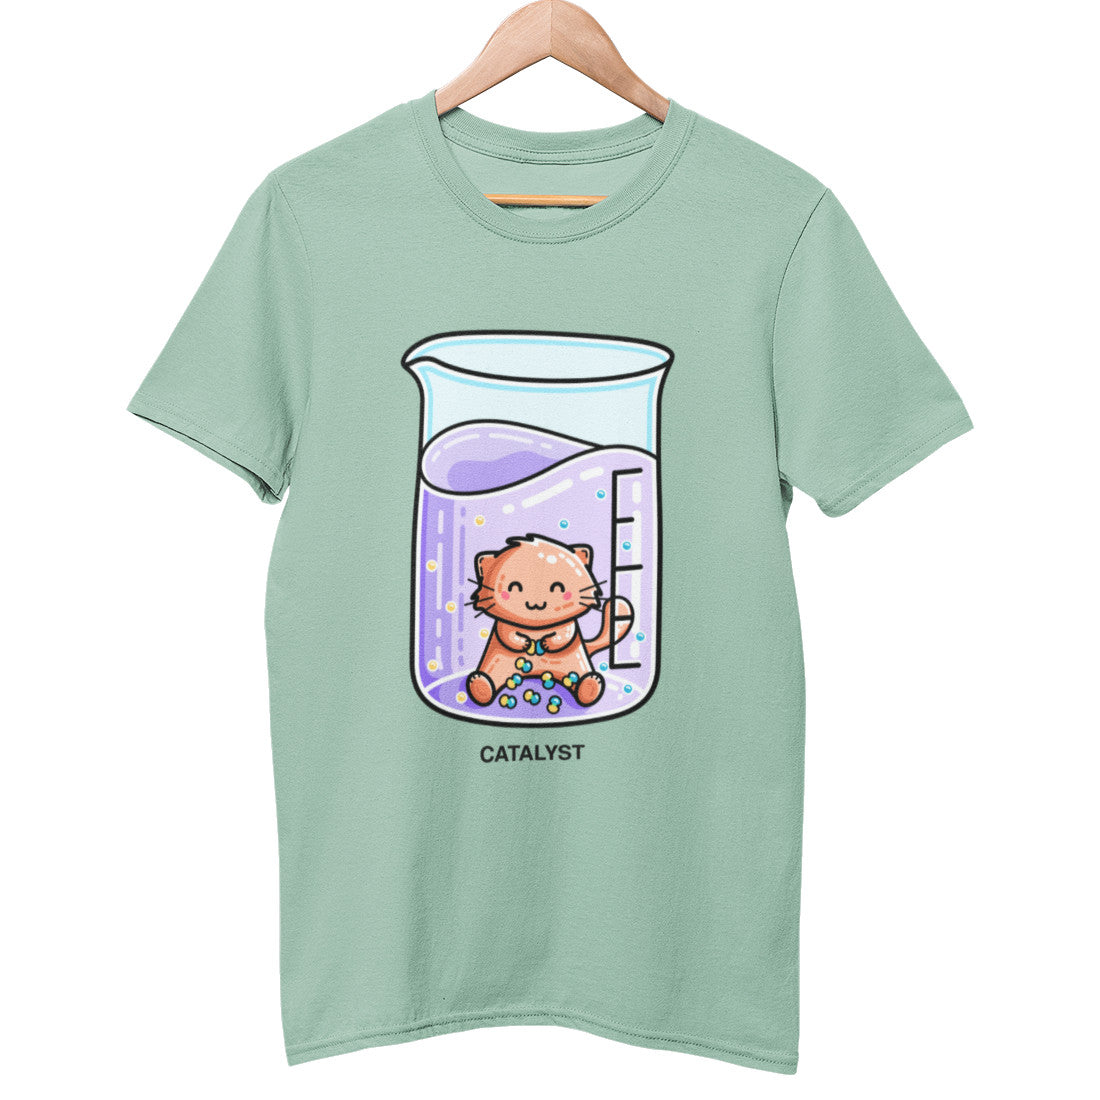 A pale aloe green coloured unisex crewneck t-shirt on a hanger with a design on its chest of a cute ginger cat sitting in a chemistry beaker of purple liquid joining atoms or yellow and green together